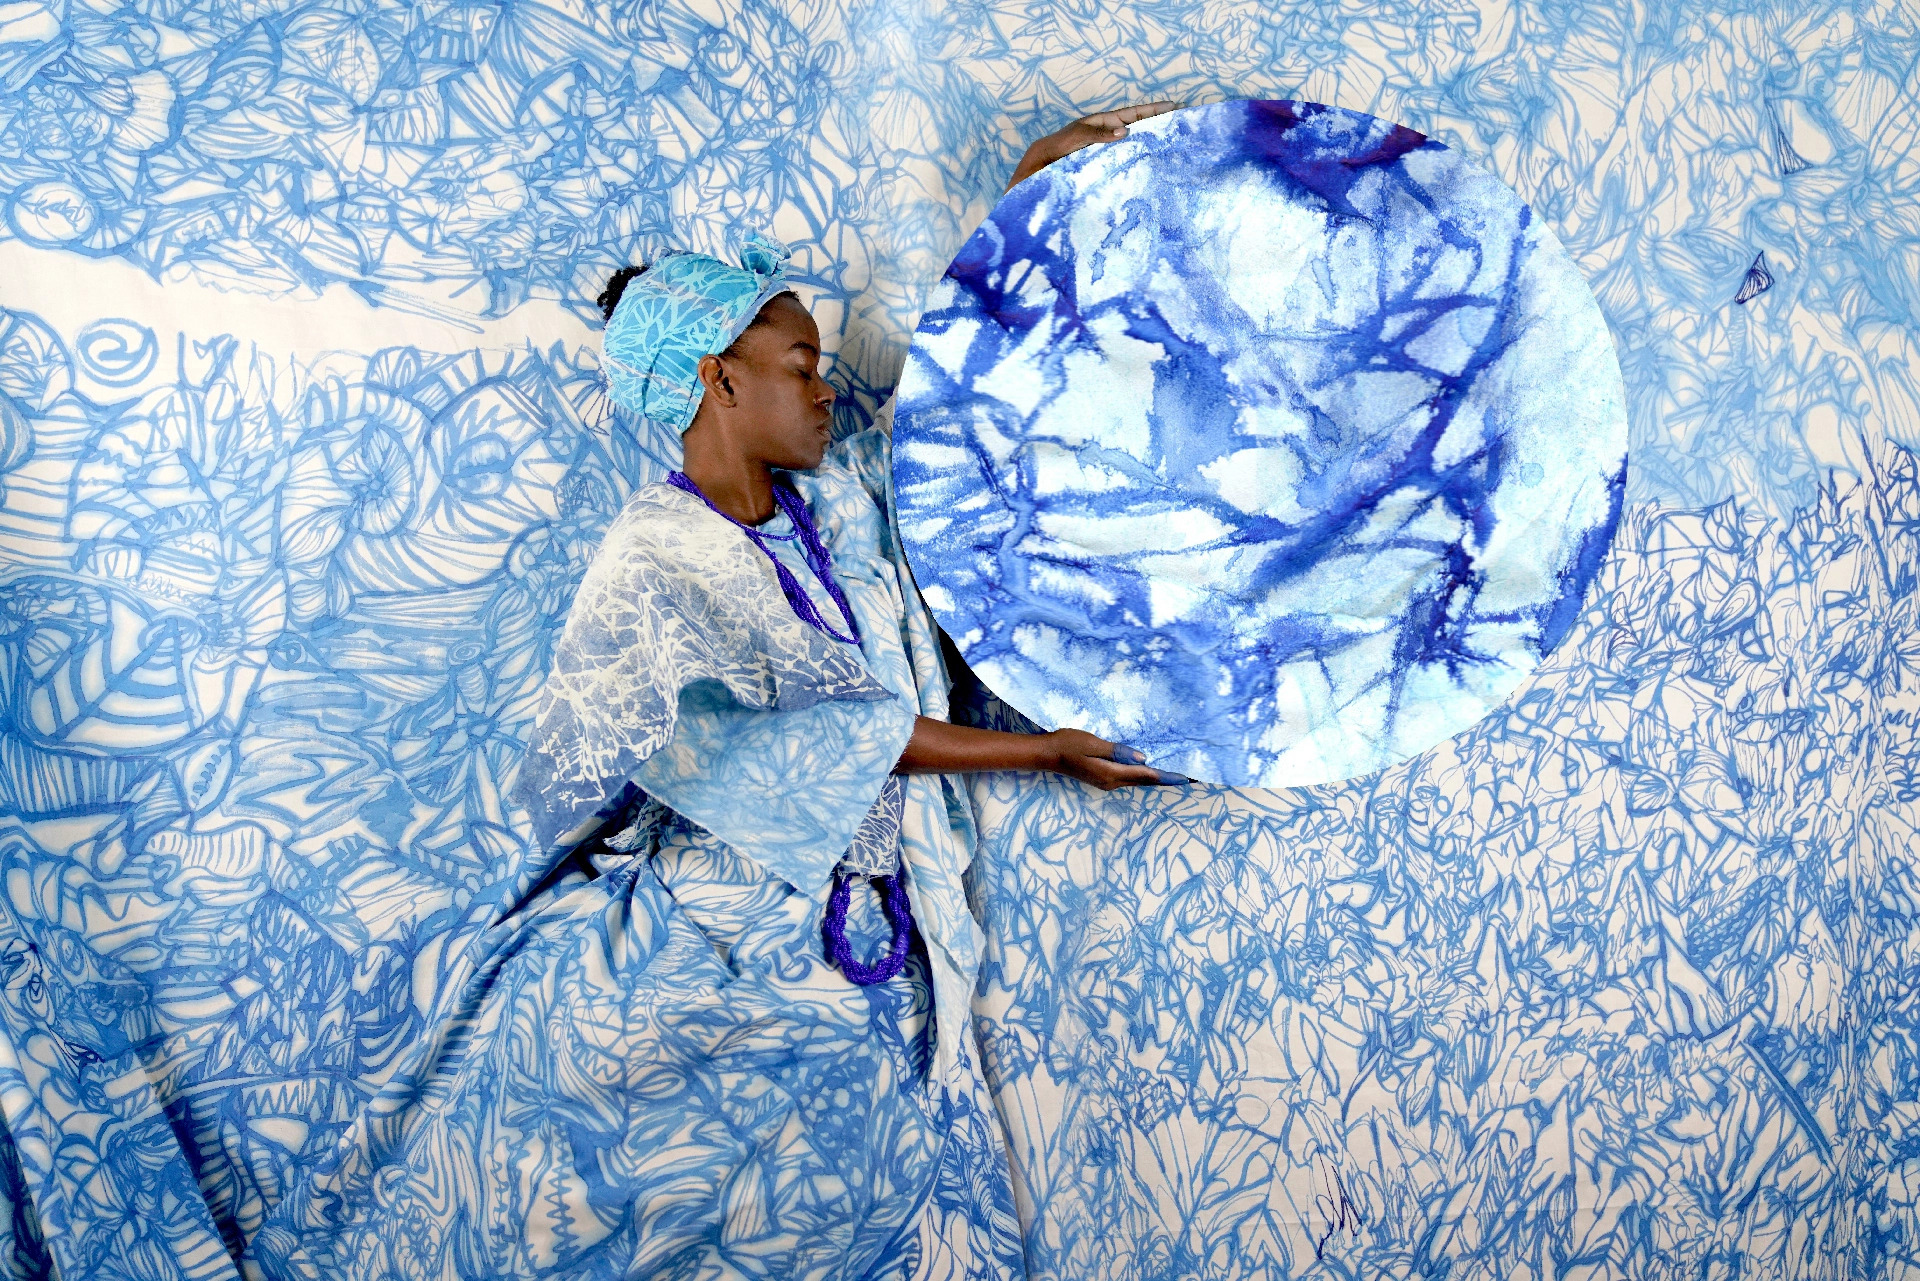 A black woman is represented holding a circle with white and blue patterns in her hands. The patterns are repeated across her dress and in the background